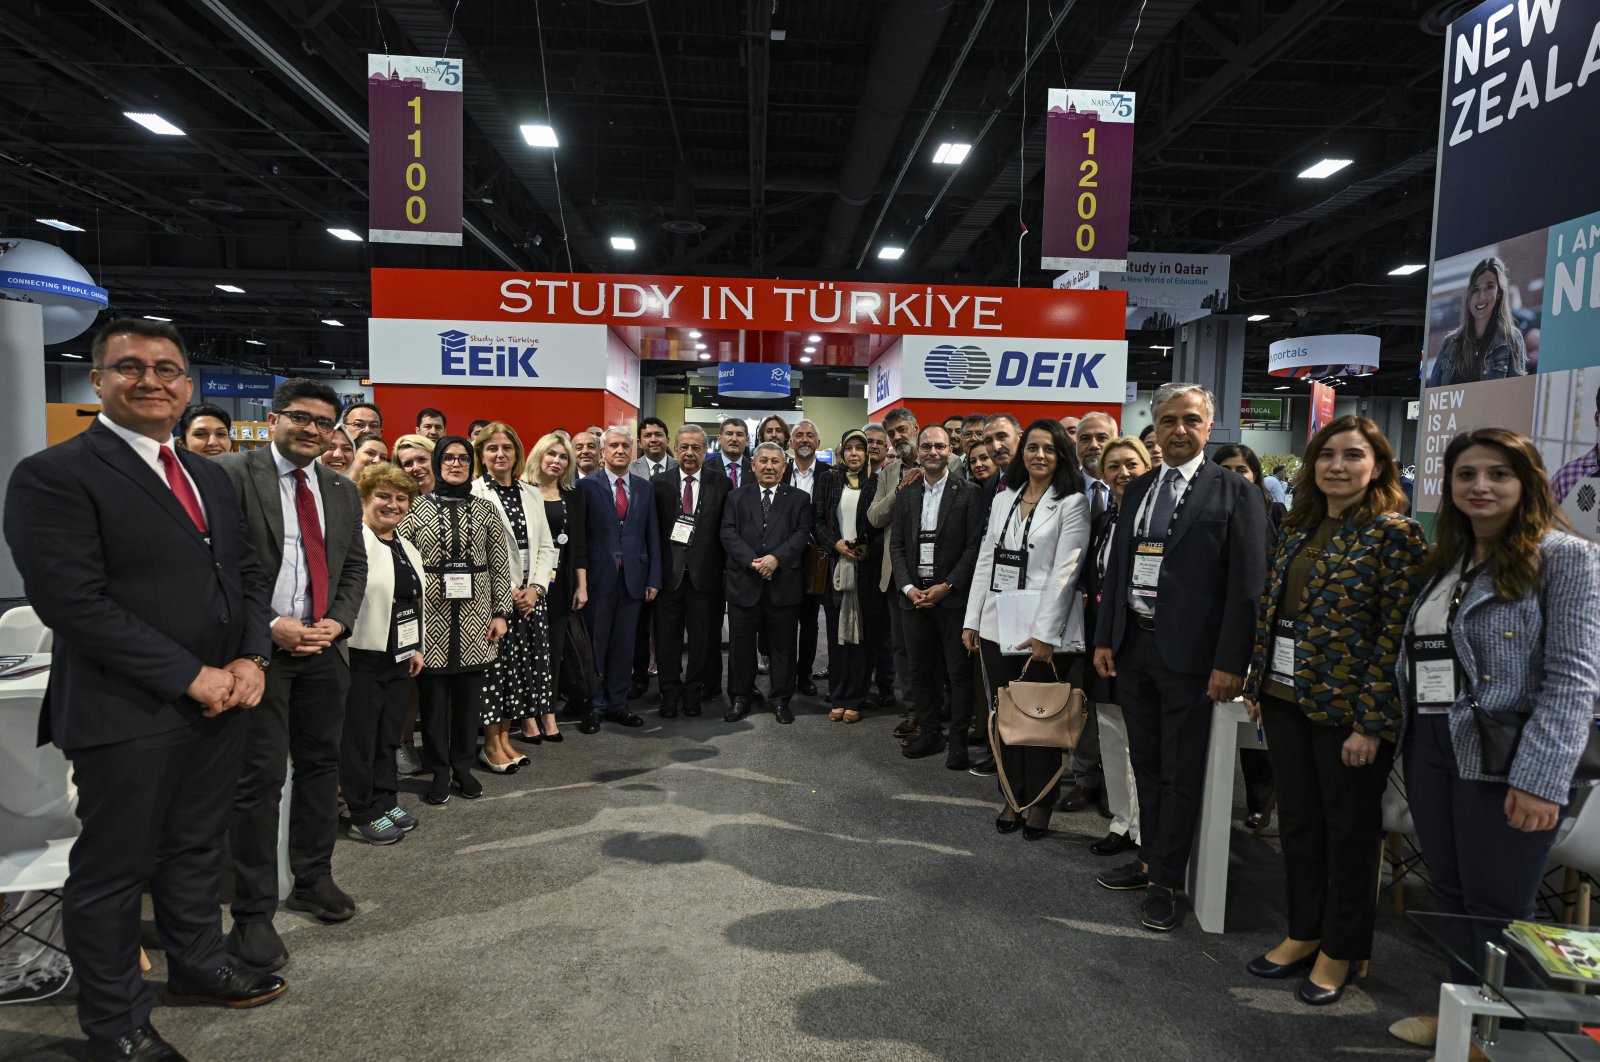 Representatives from Turkish universities are posing next to the stand during an international education expo in Washington DC, U.S., May 30, 2023. (AA Photo)